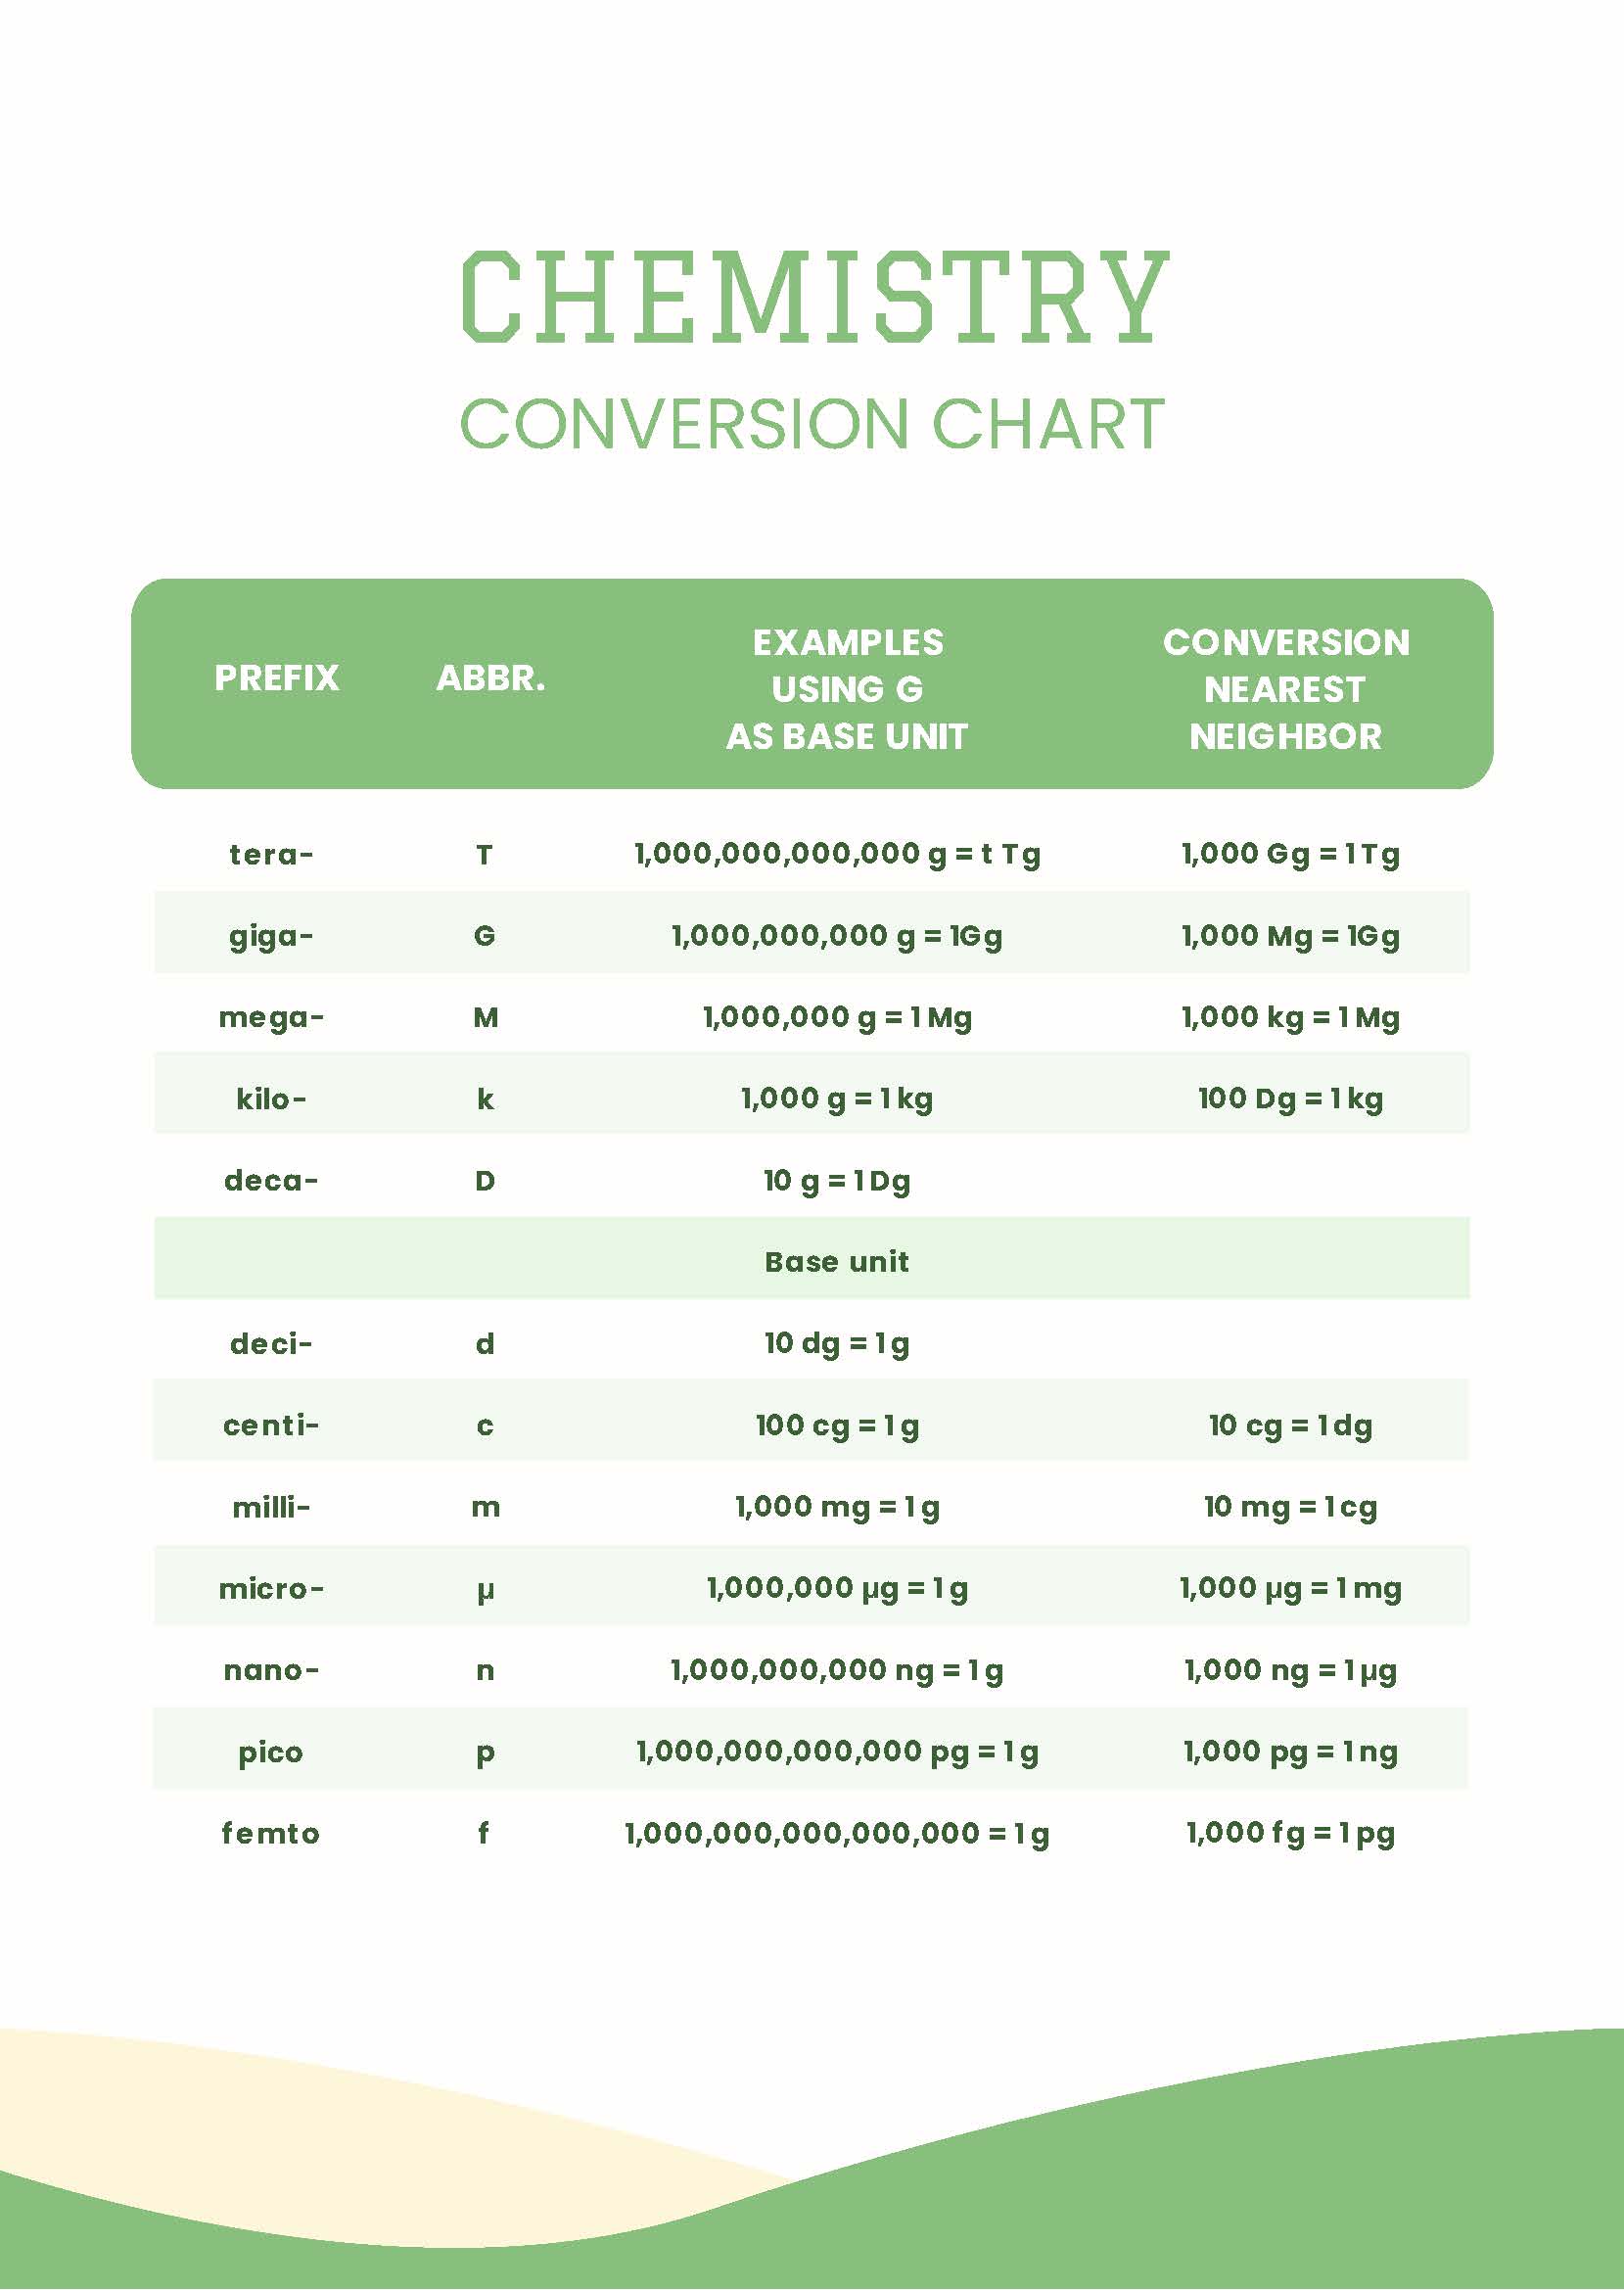 Chemistry Conversion Chart in PDF